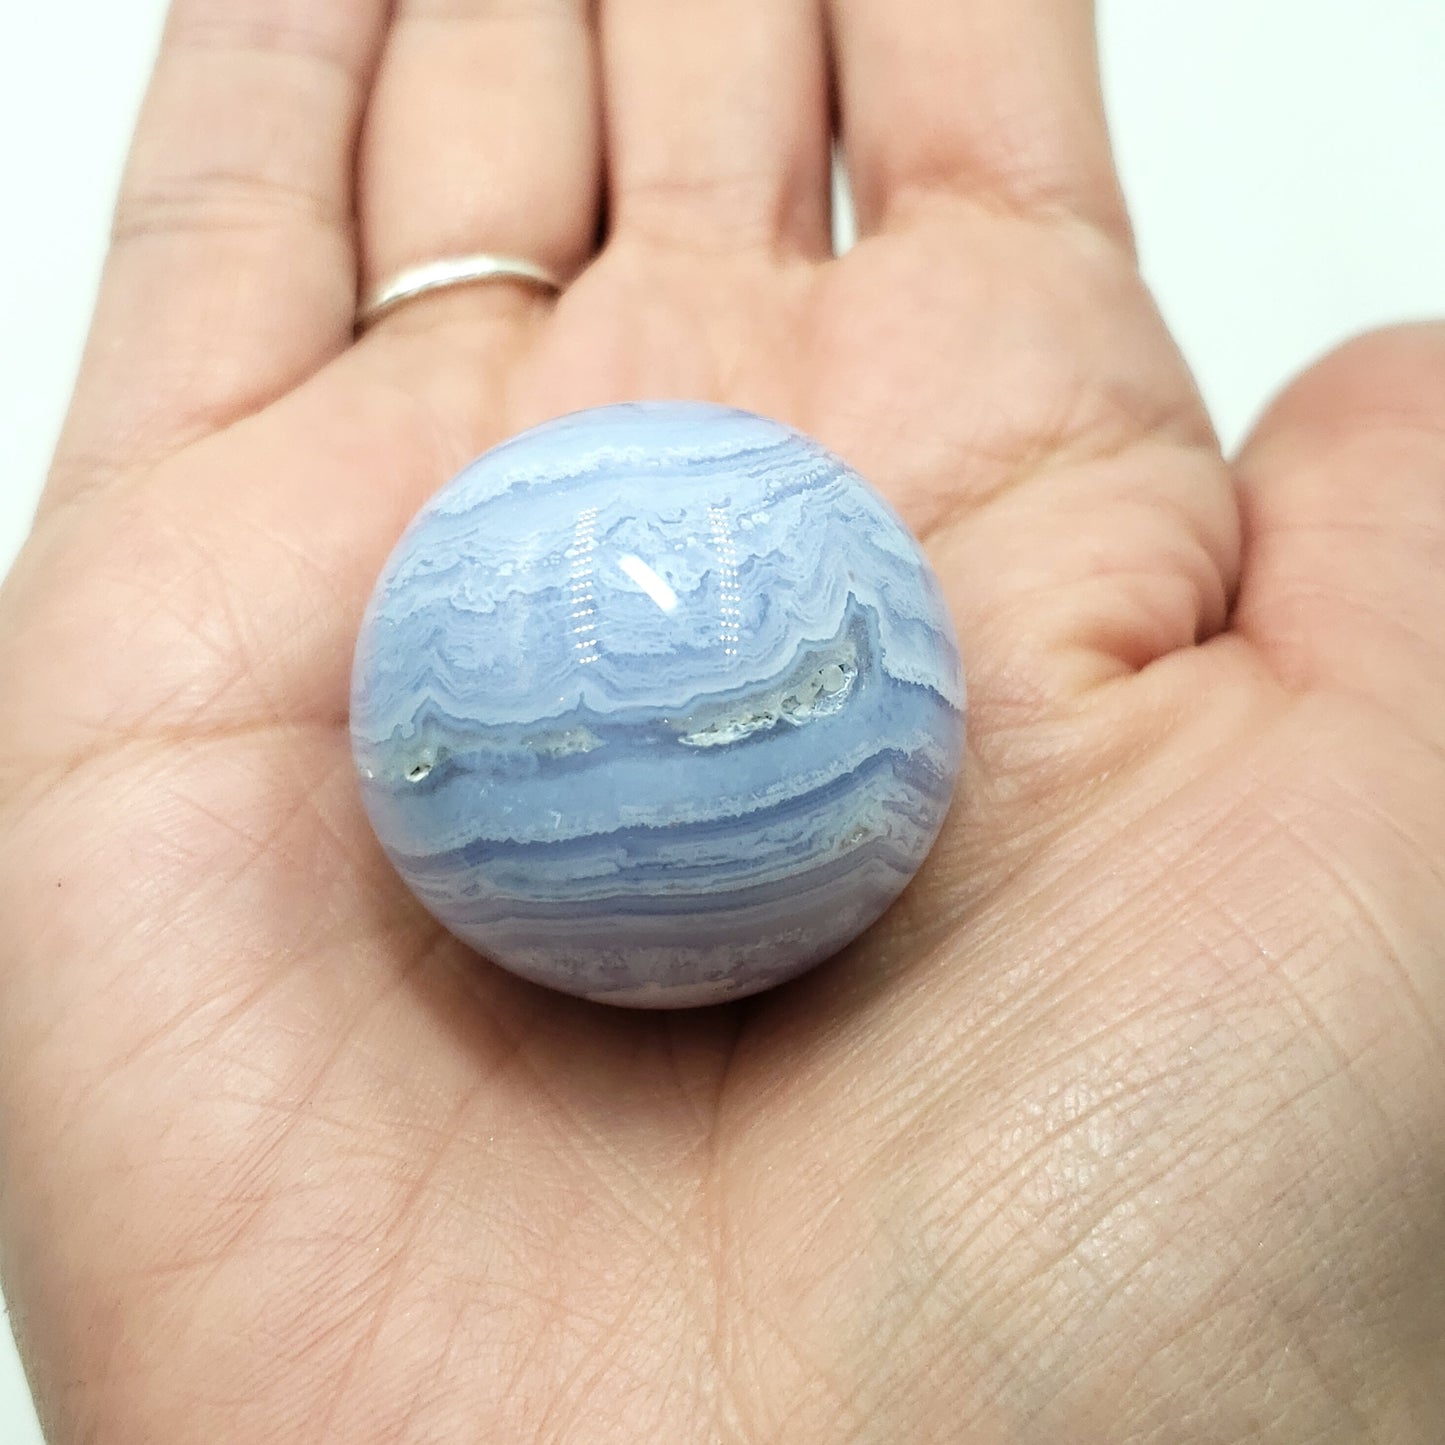 Blue Lace Agate Sphere 31.7 mm 43.5 g